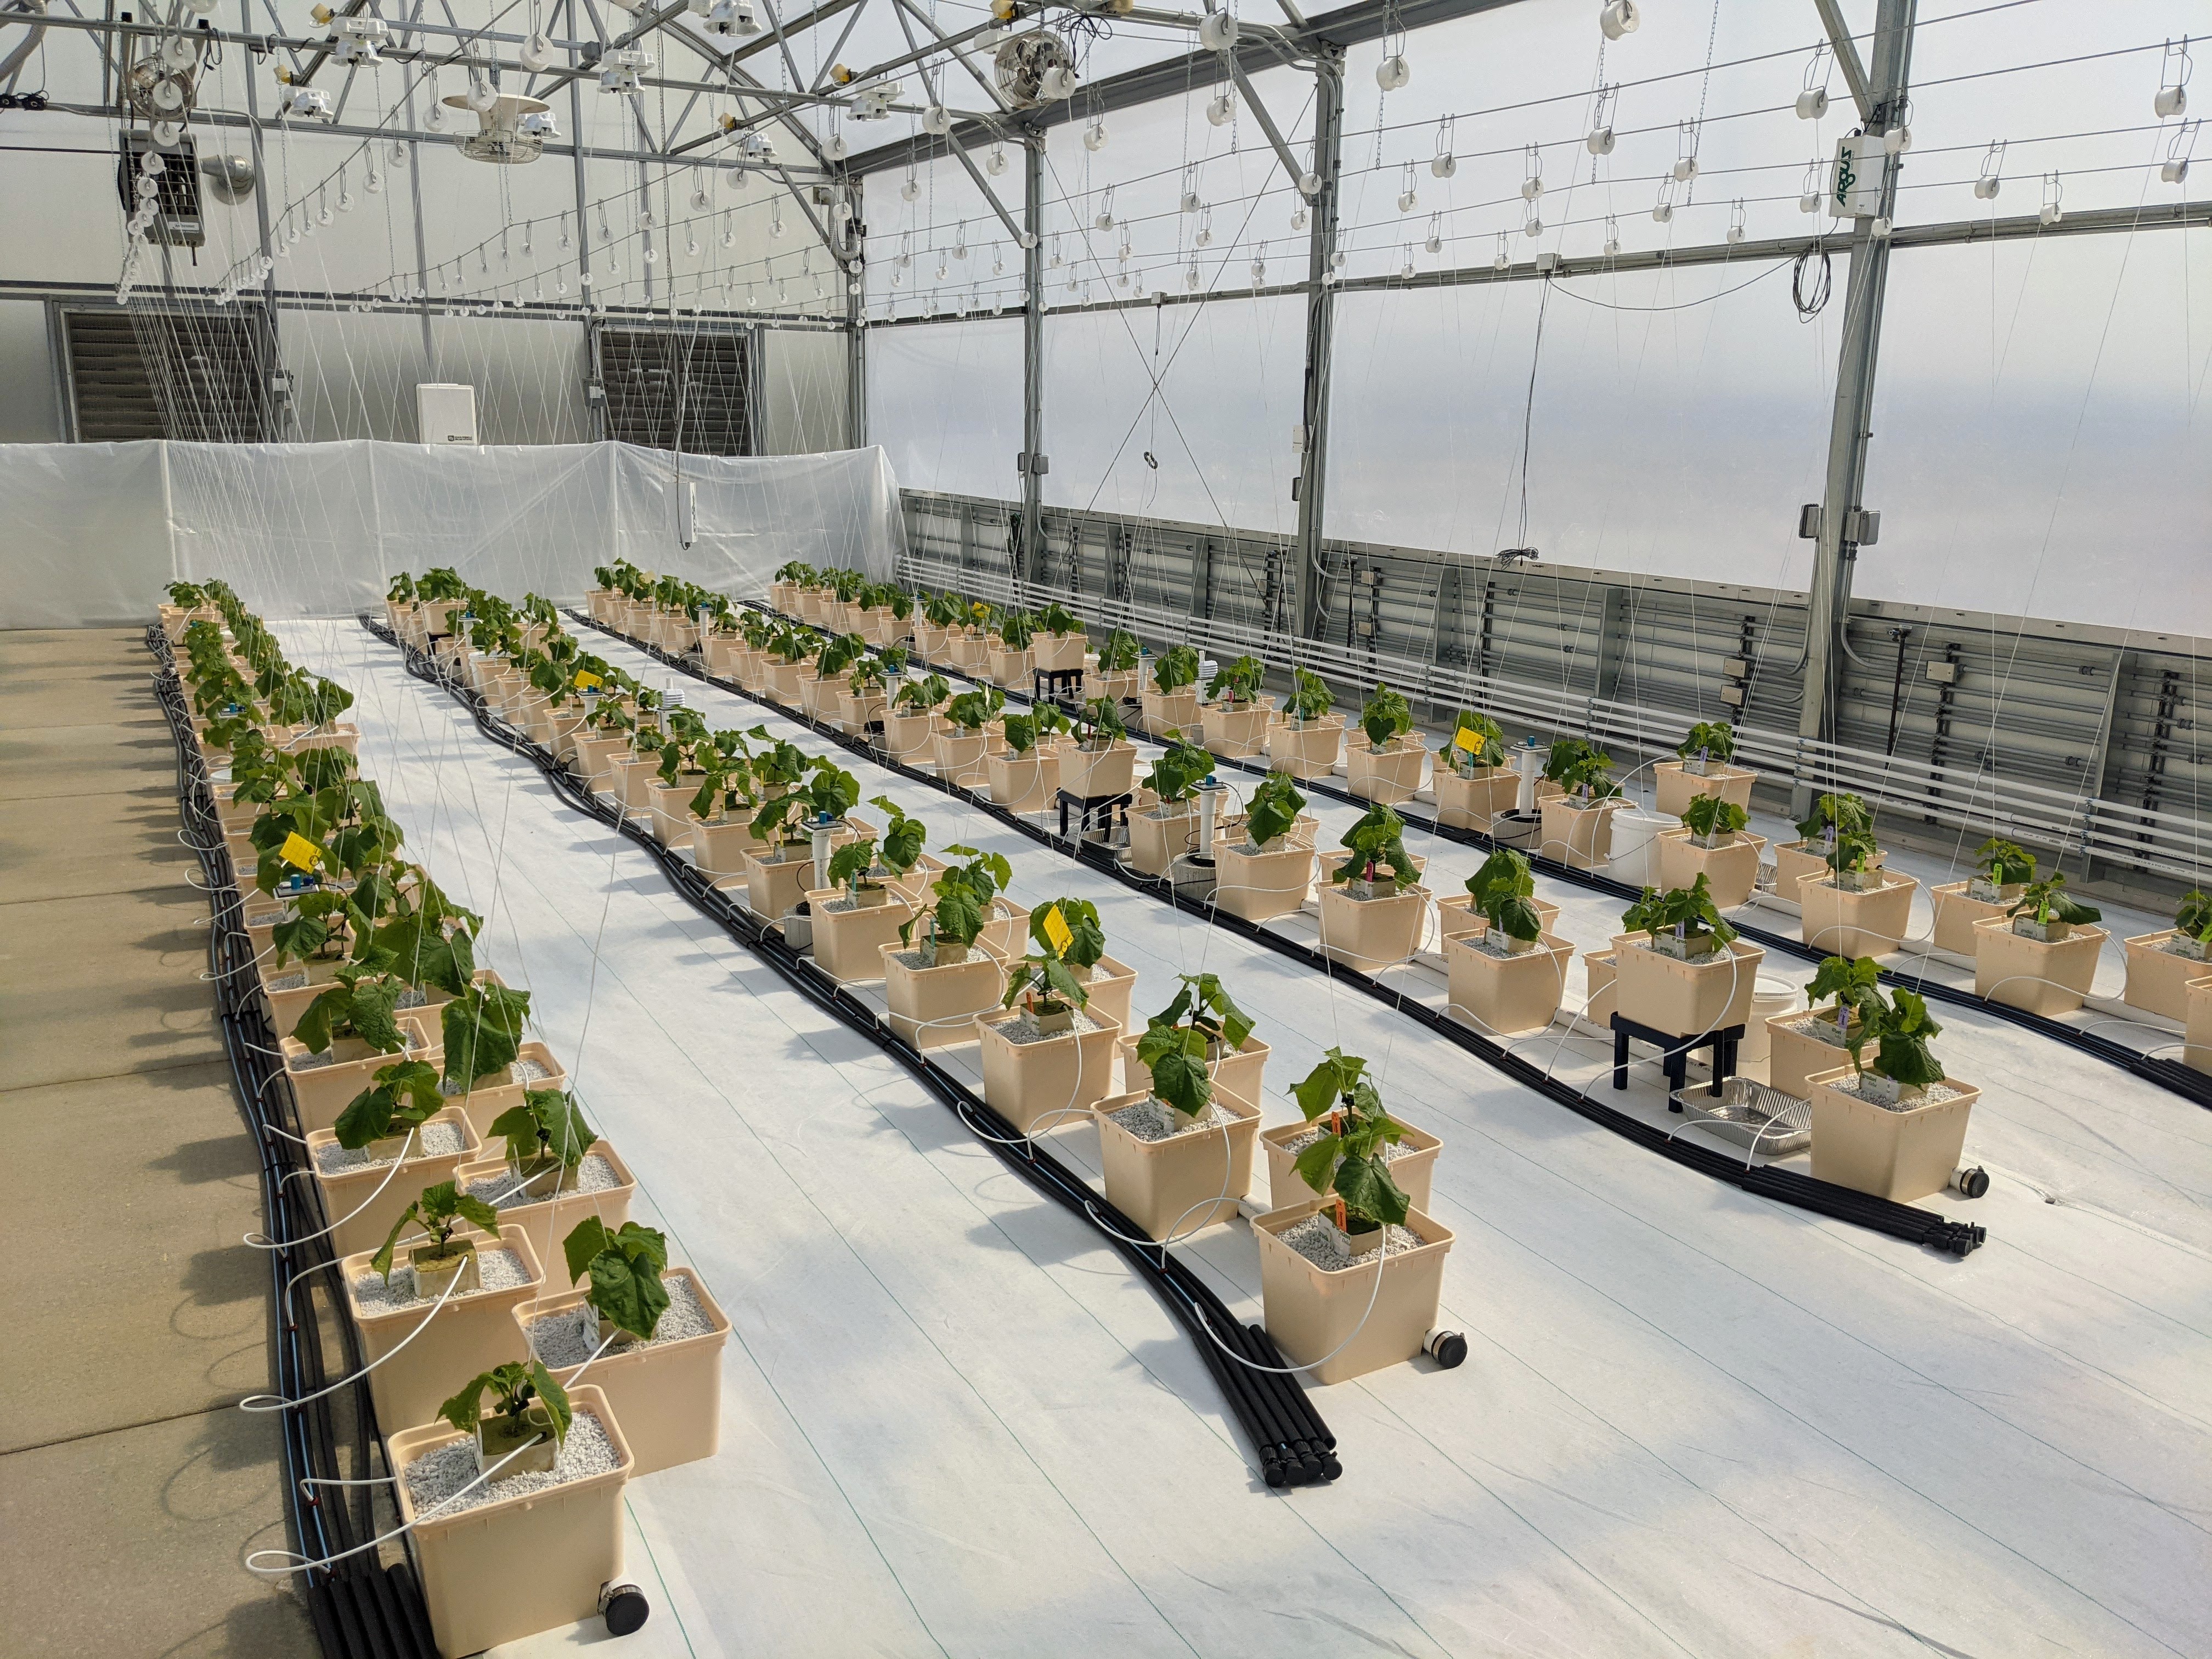 Young cucumber plants are part of a UK study evaluating cucumbers for hydroponic greenhouse production. Photo by Garrett Owen